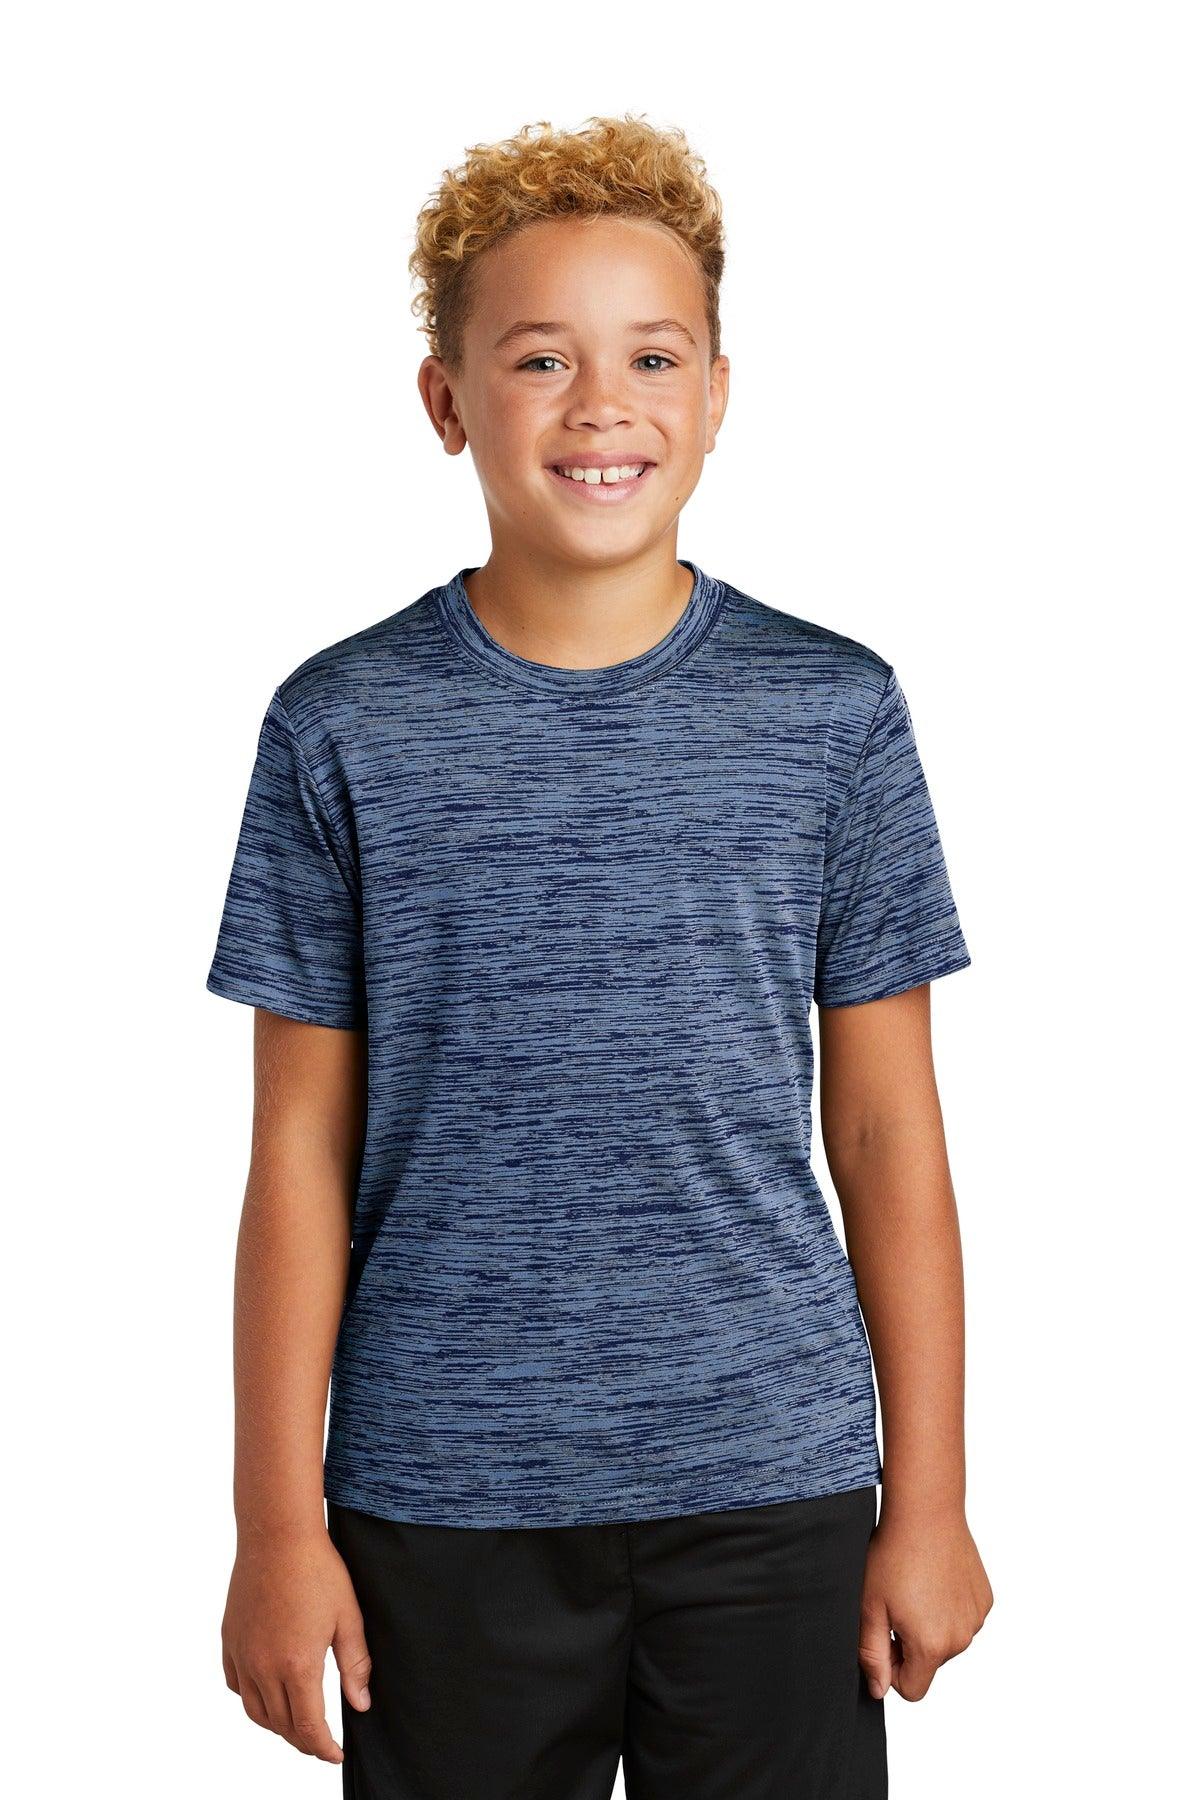 Sport-Tek Youth PosiCharge Electric Heather Tee. YST390 - Dresses Max